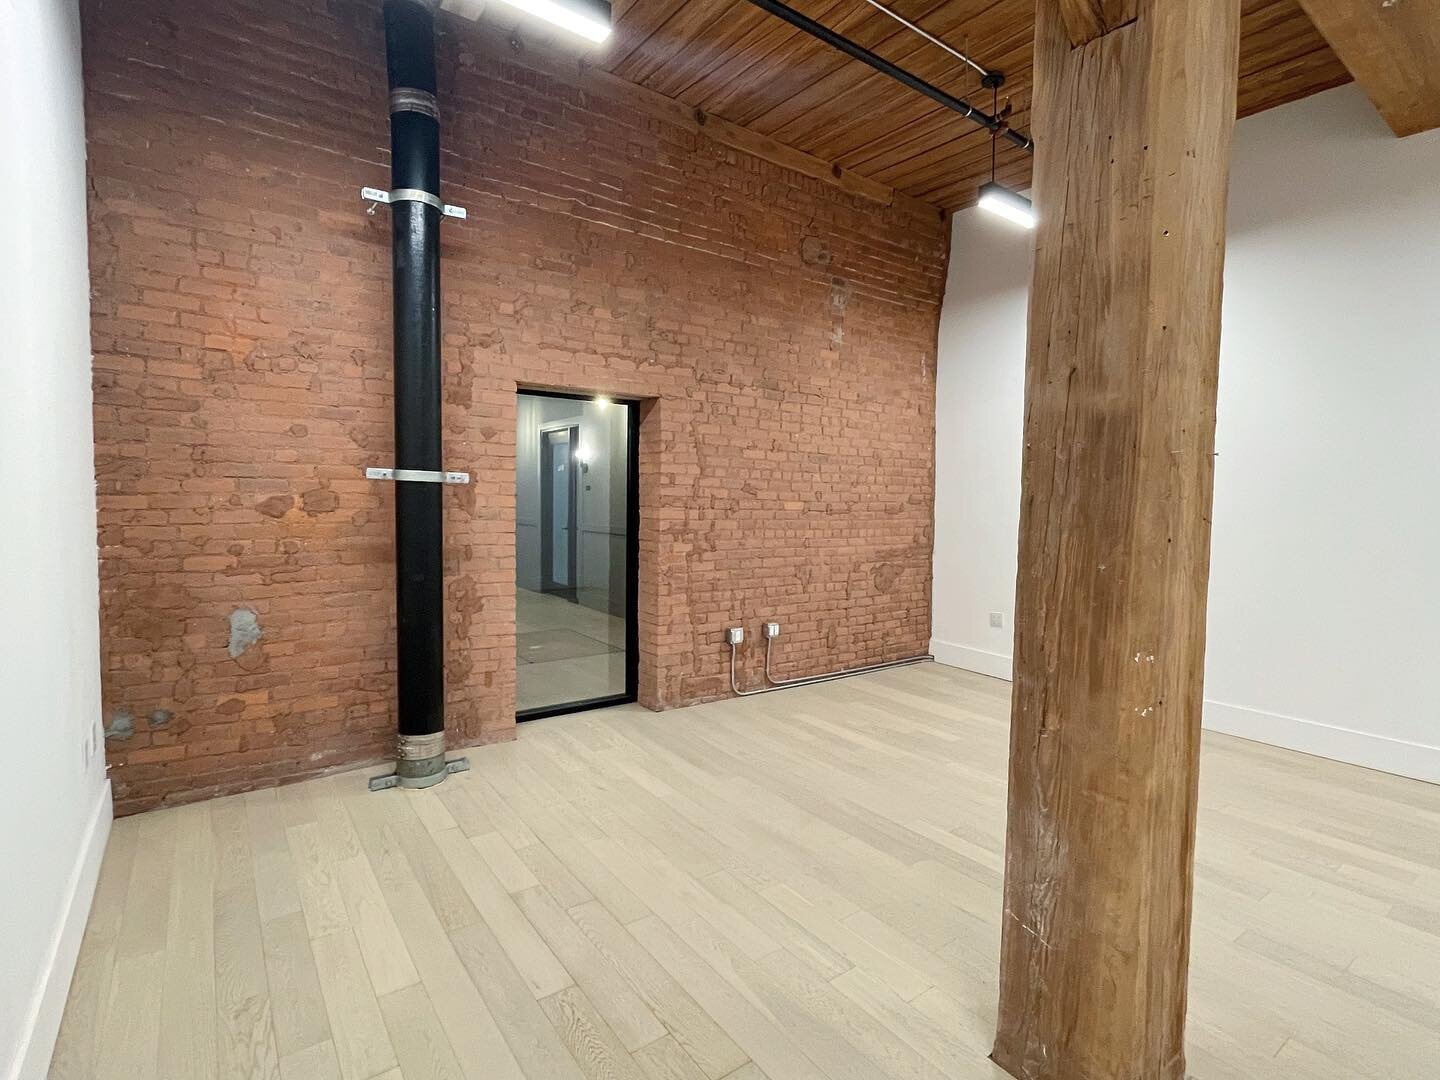 Have you heard!? We have a BRAND NEW OFFICE. The Victoria Lee Interiors HQ is relocating to Gowanus, Brooklyn.

We&rsquo;re so excited to have a new office for the team and the ability to present current and new clients and new type of high-end servi